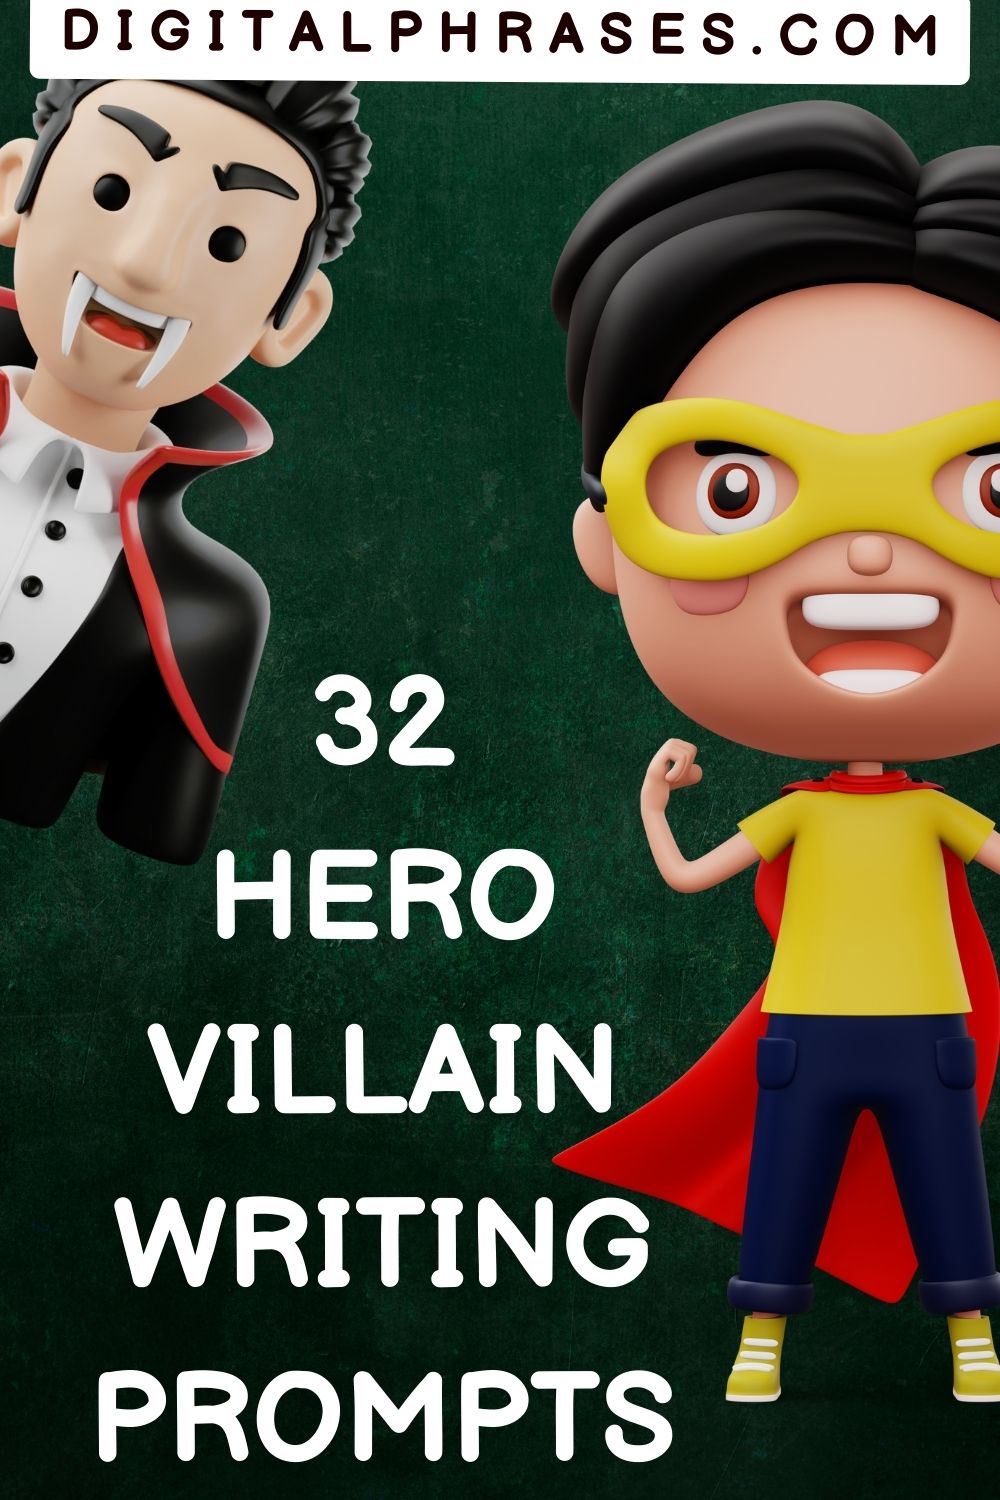 green background image with text - 32 hero villain writing prompts